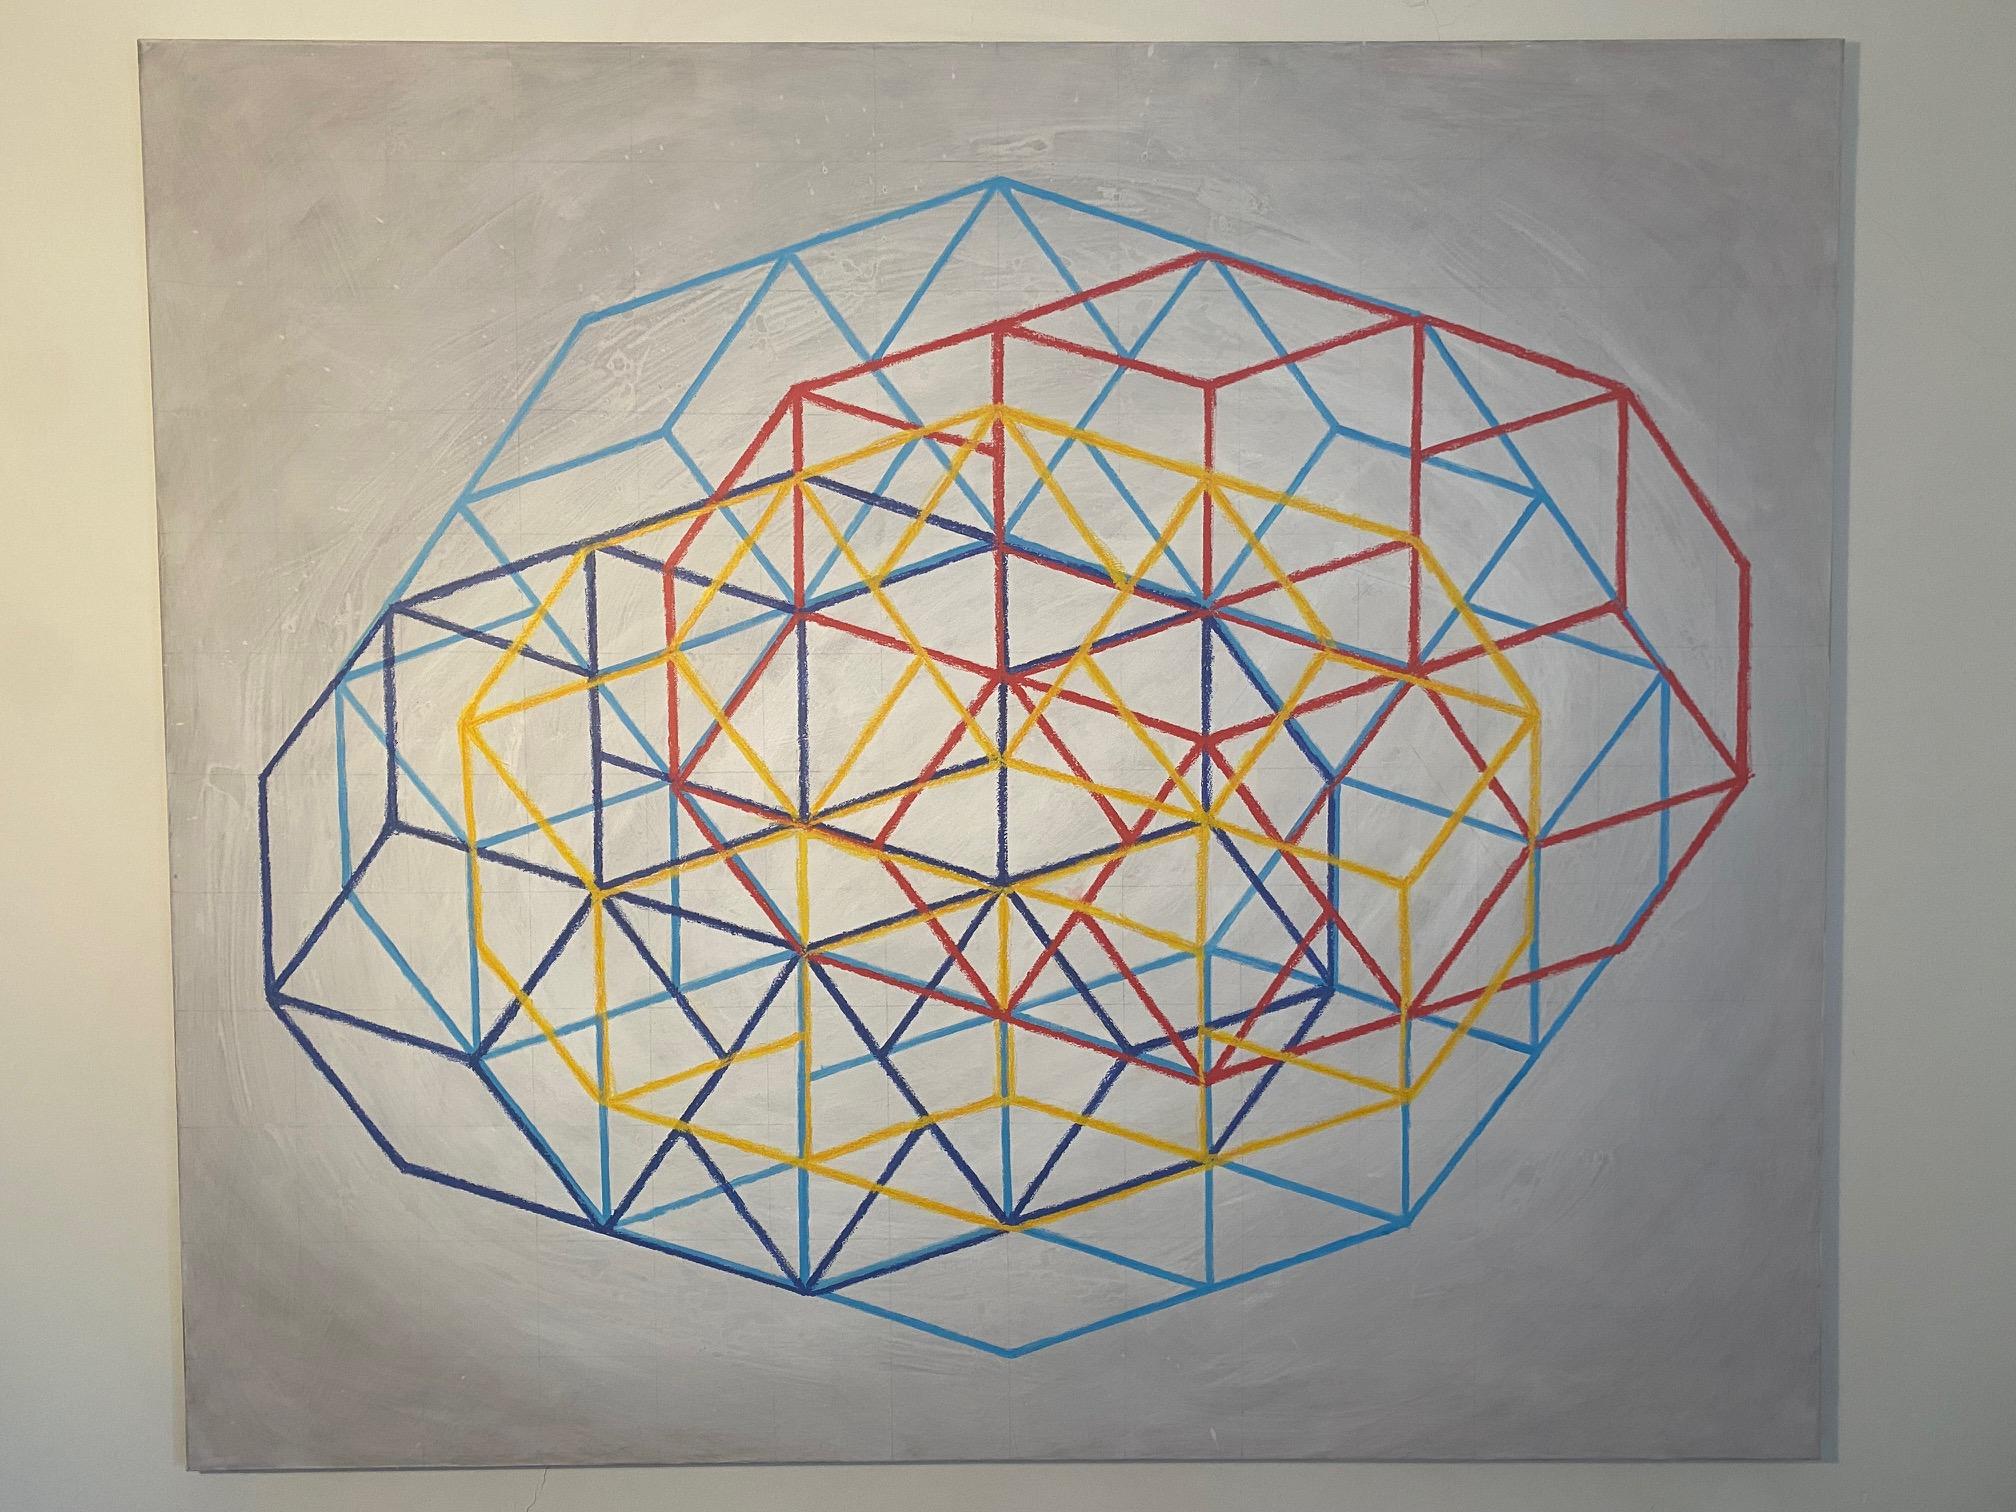 Light as Light  - contemporary geometric artwork depicting the golden triangle  - Painting by Klaus Heuermann